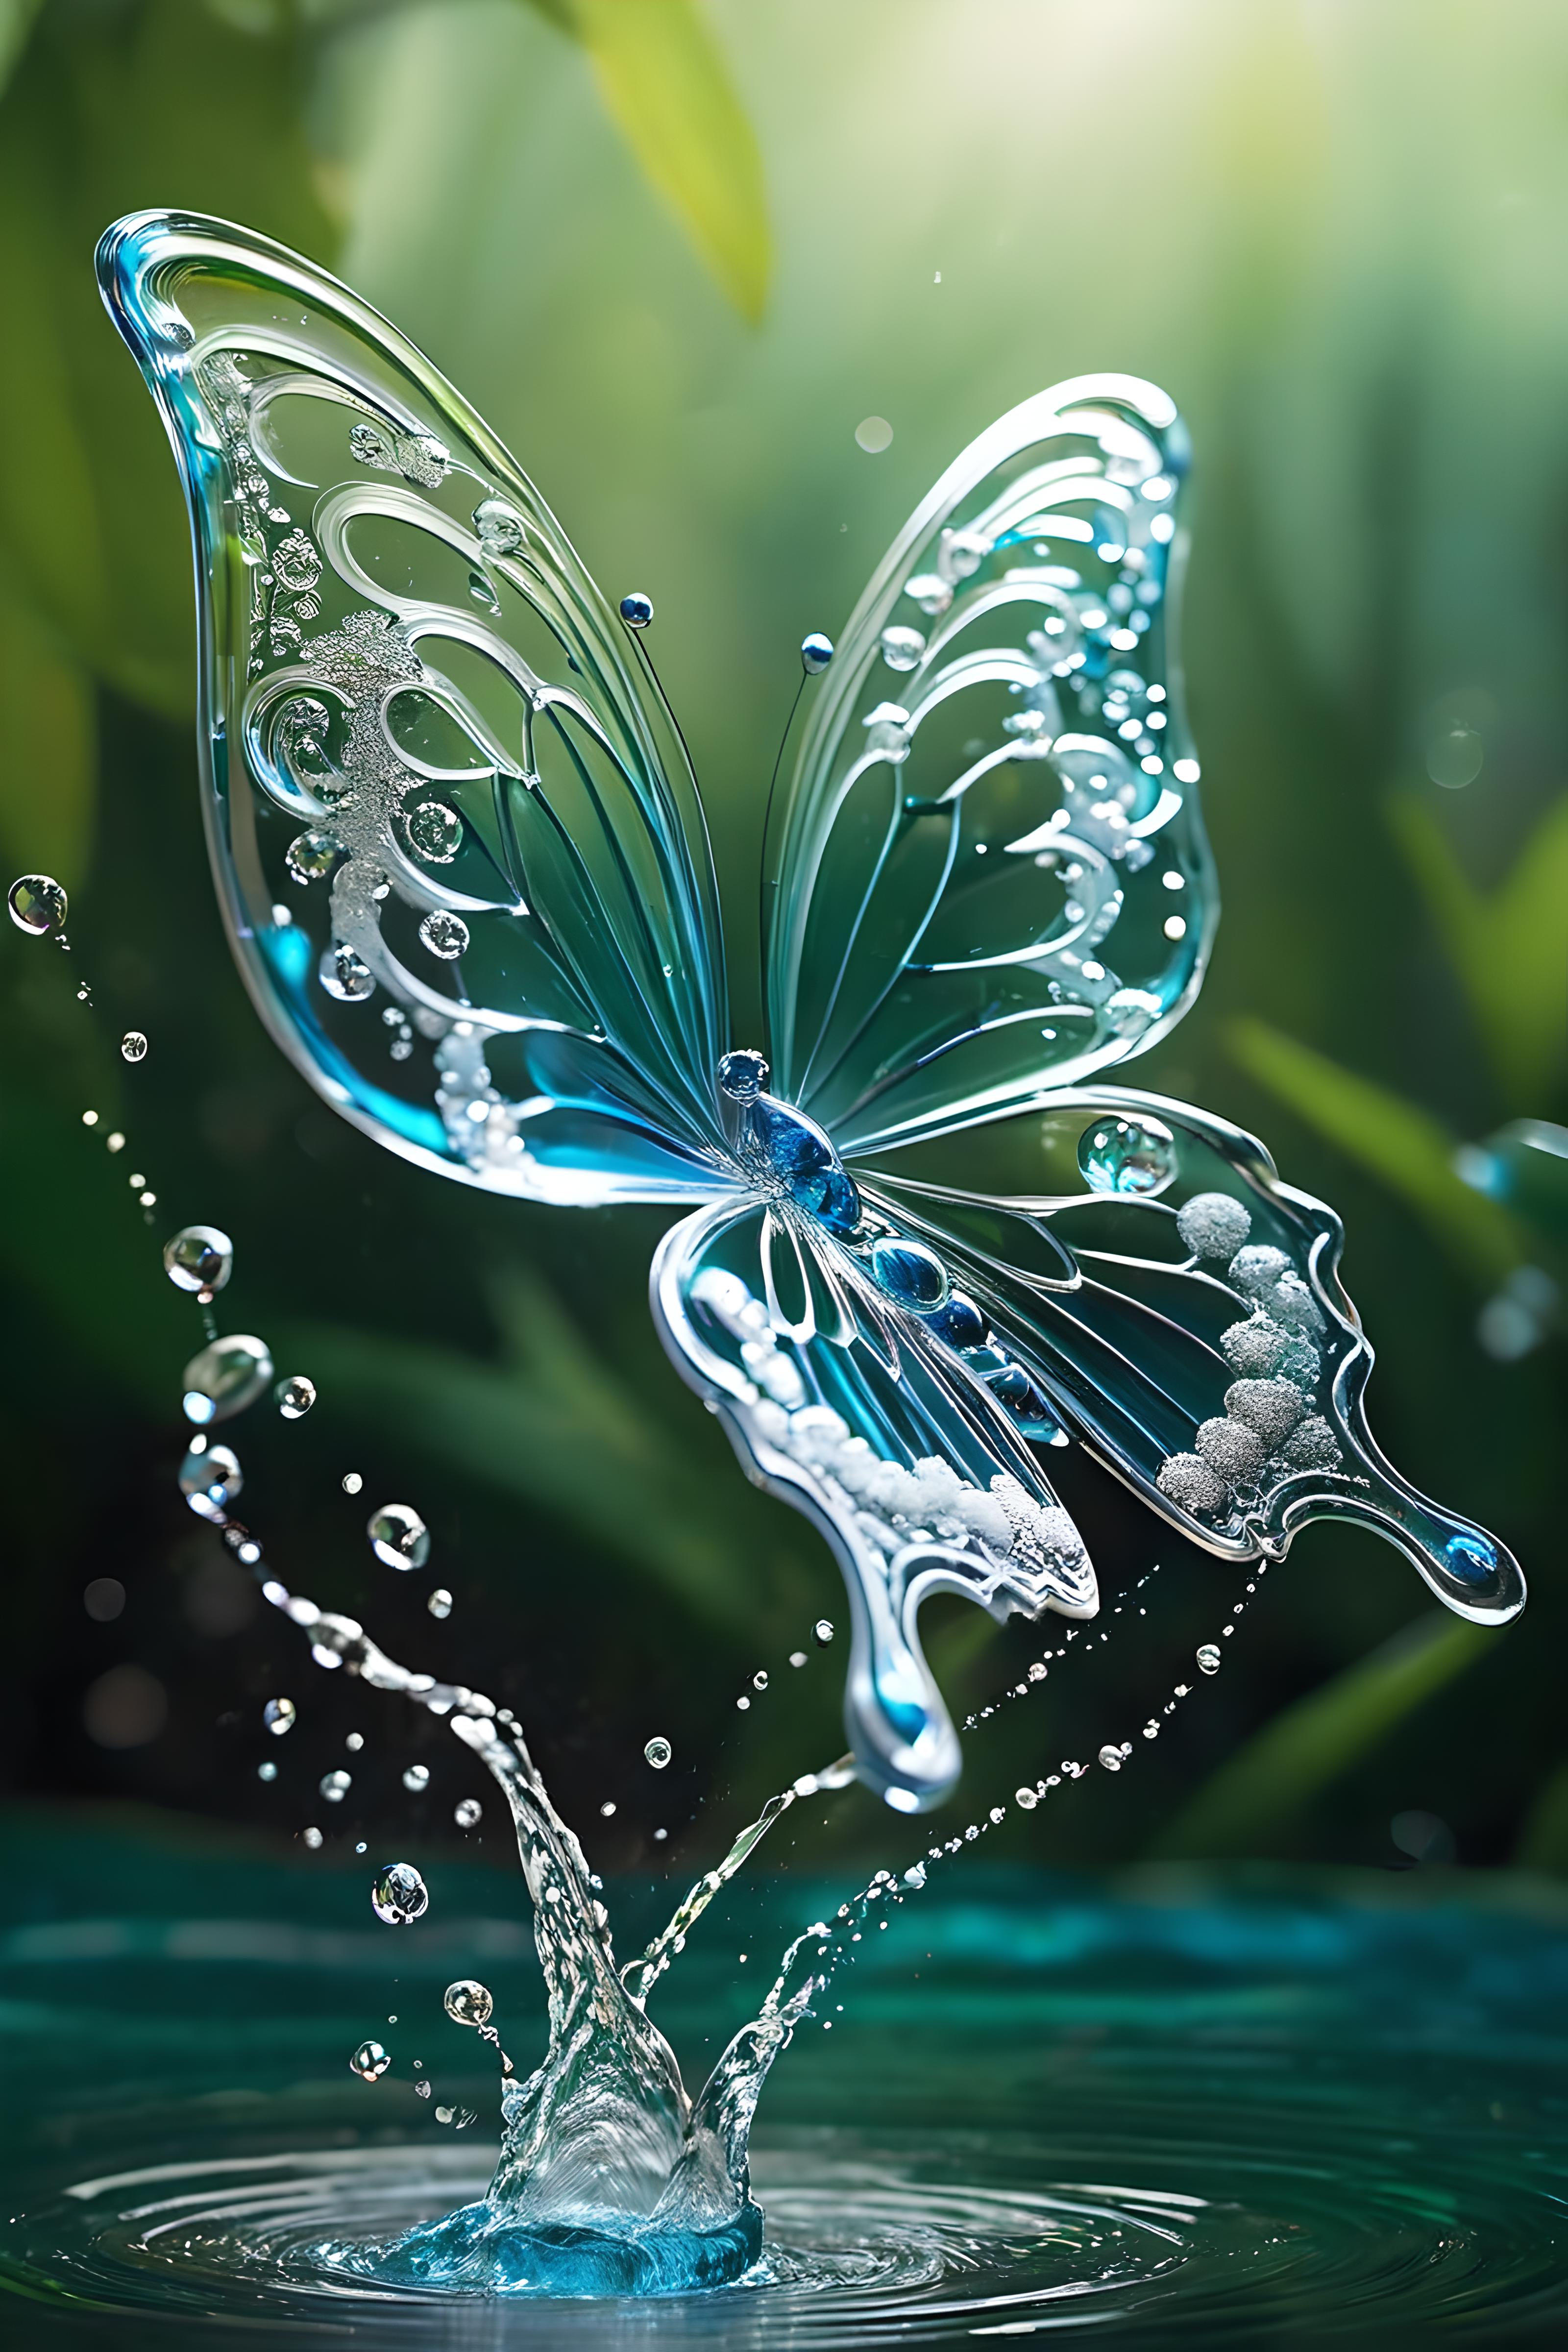 A blue butterfly with a sparkling blue body and green wings, surrounded by water droplets.